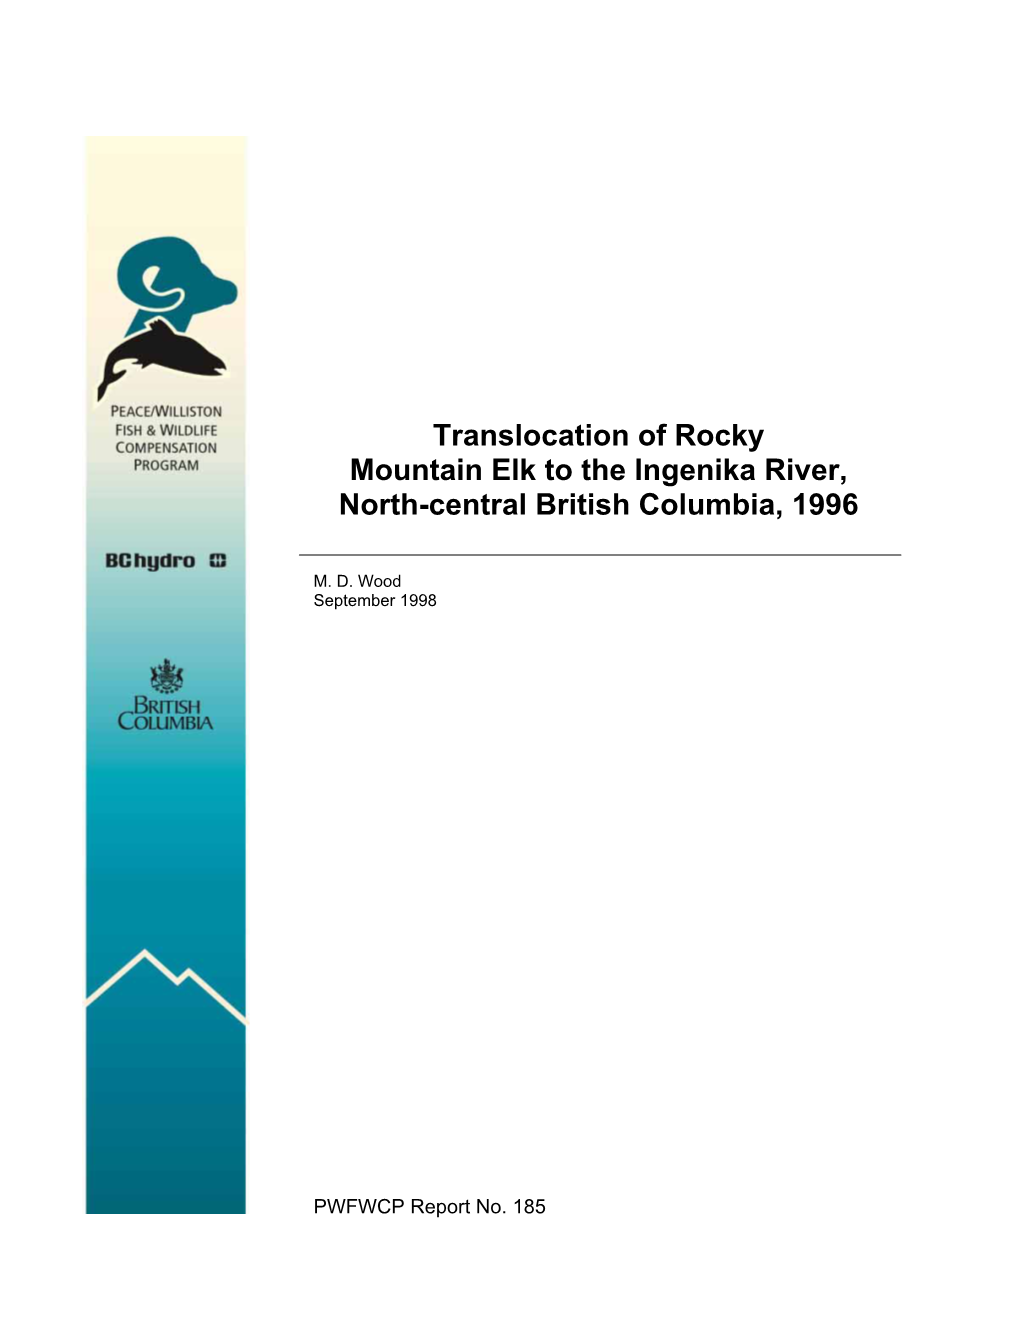 Translocation of Rocky Mountain Elk to the Ingenika River, North-Central British Columbia, 1996